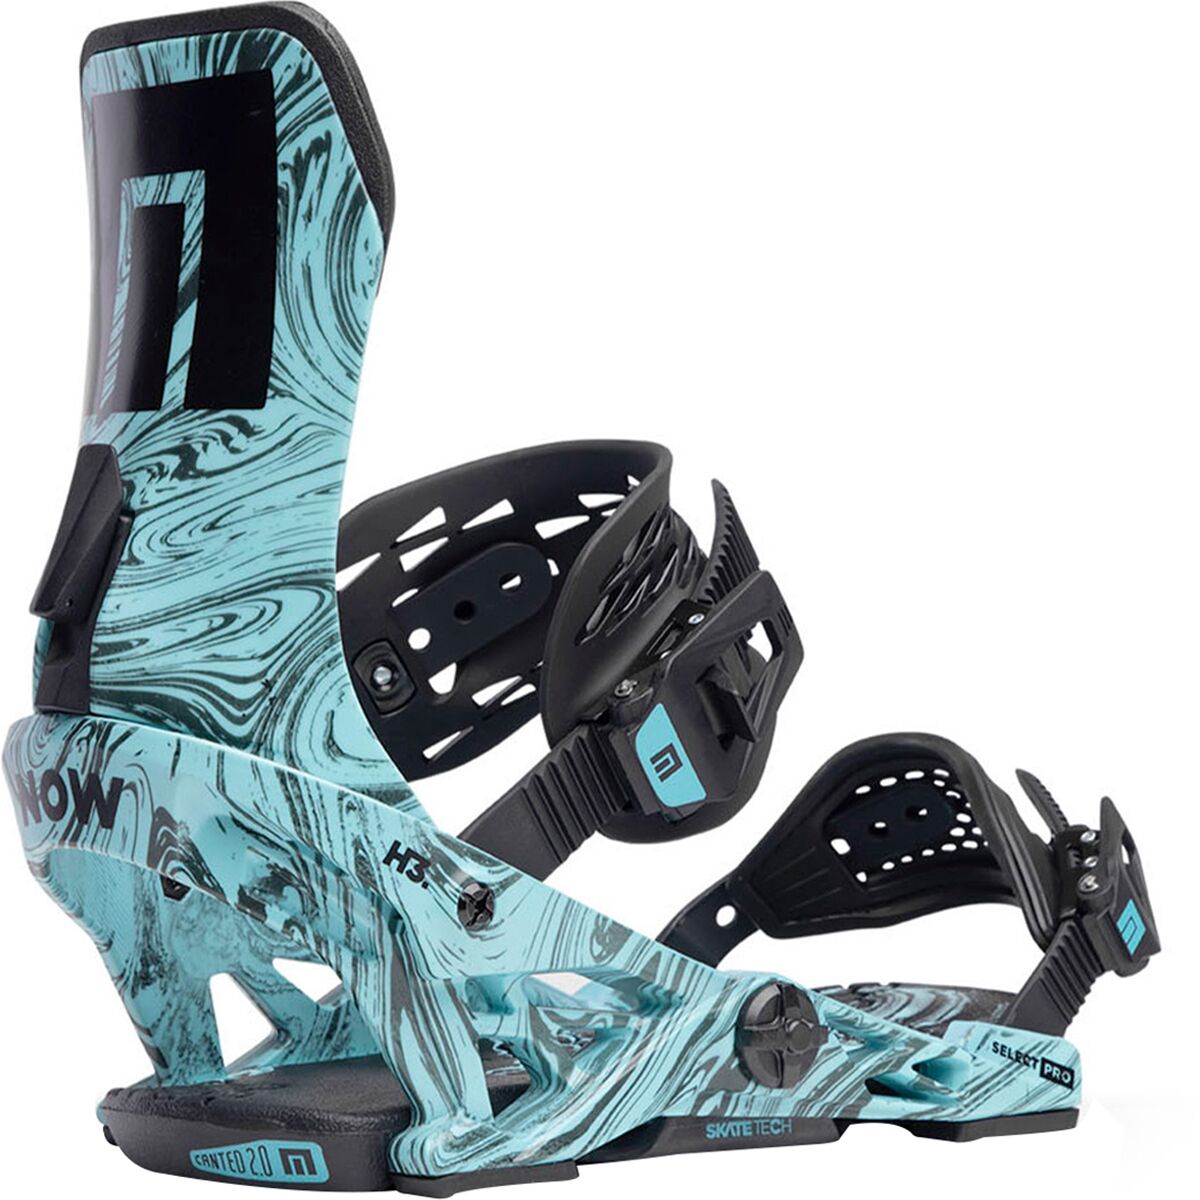 Now BNG Select Pro LTD Snowboard Binding